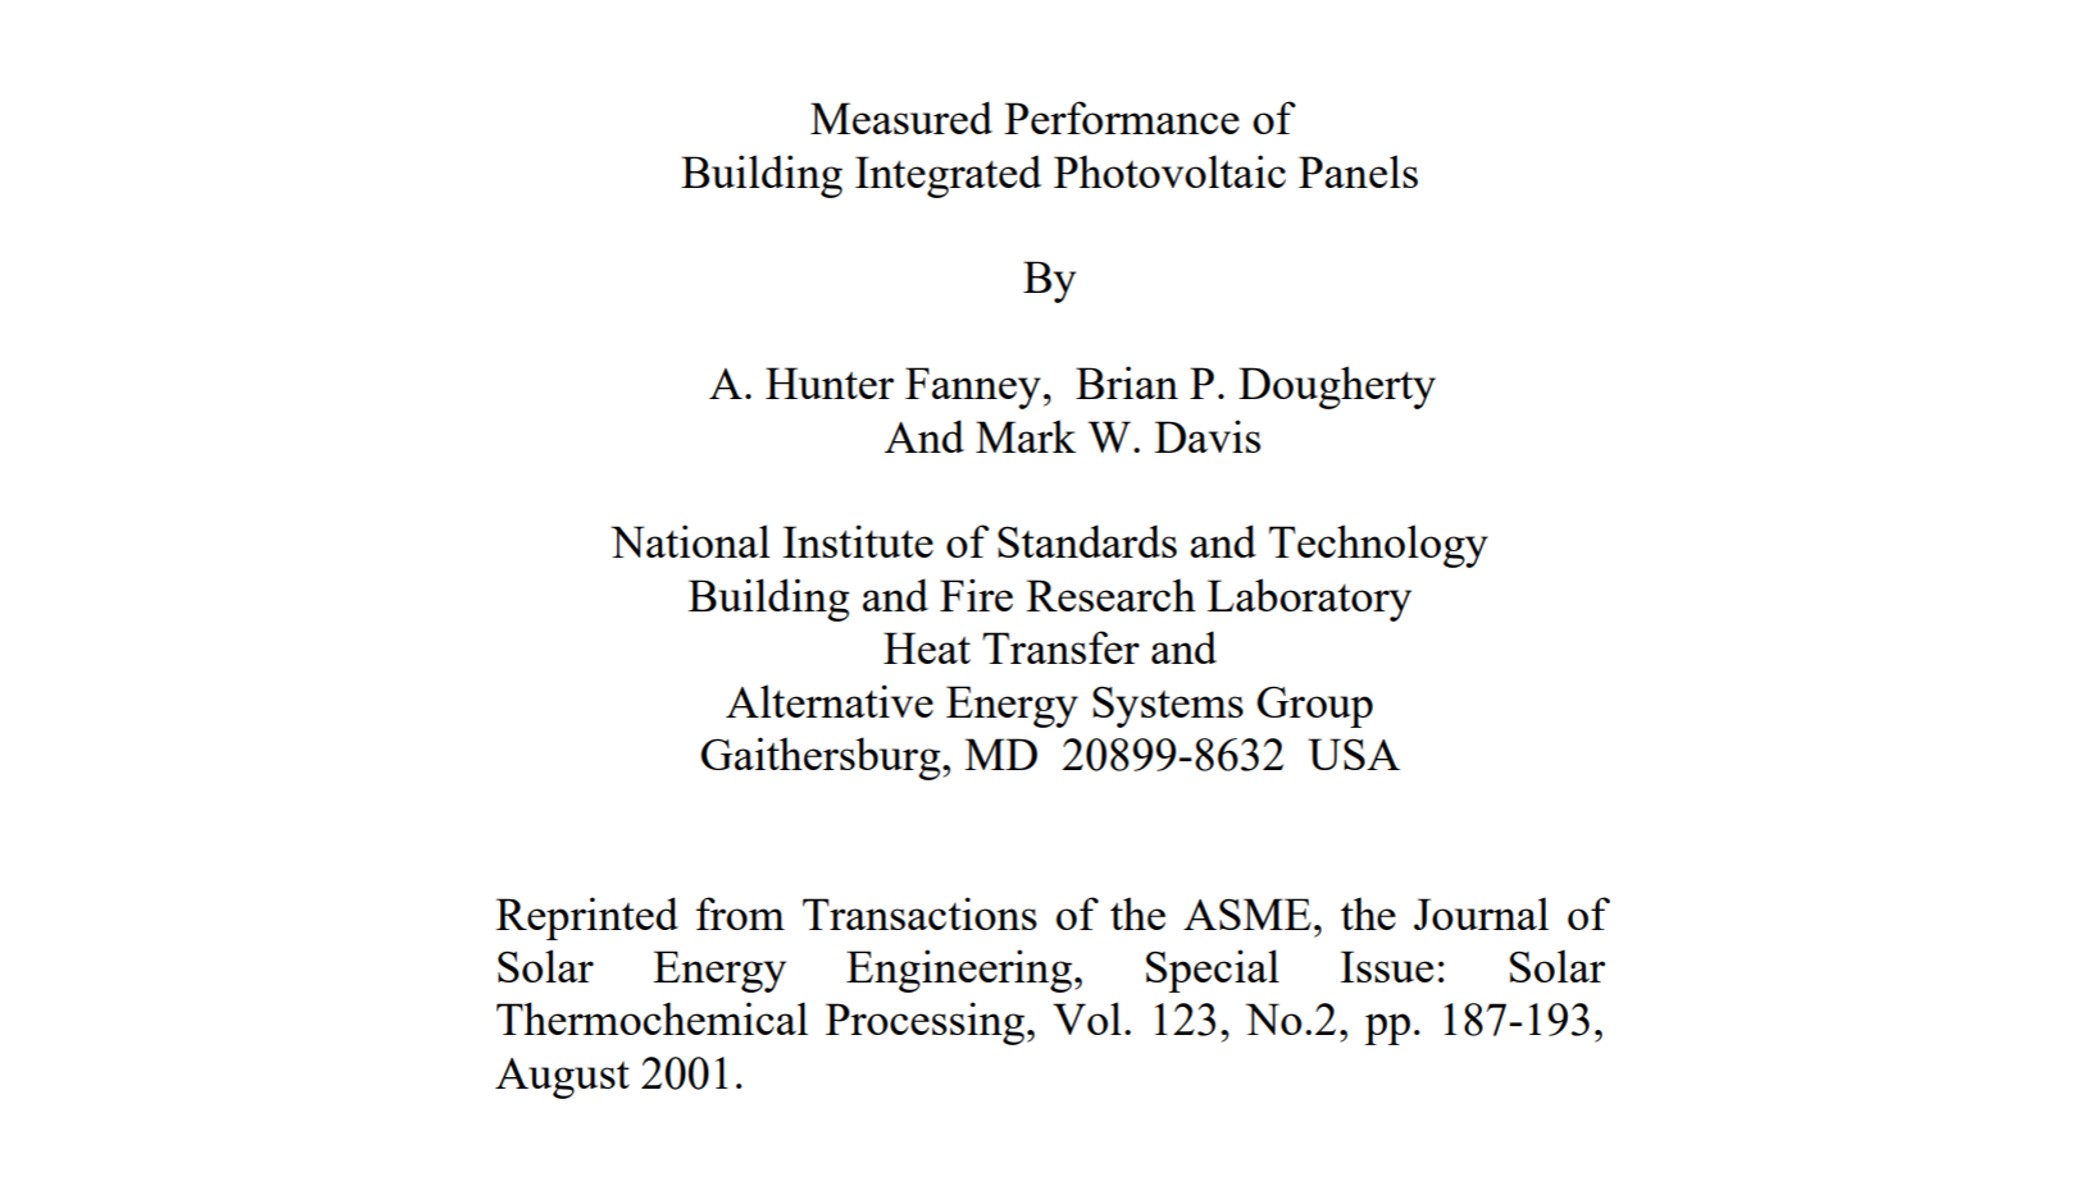 2001 A.Hunter Fanney, Brian P. Doughterty, Mark W. Davis – ‚Measured Performance of Building Integrated Photovoltaic Panels‘